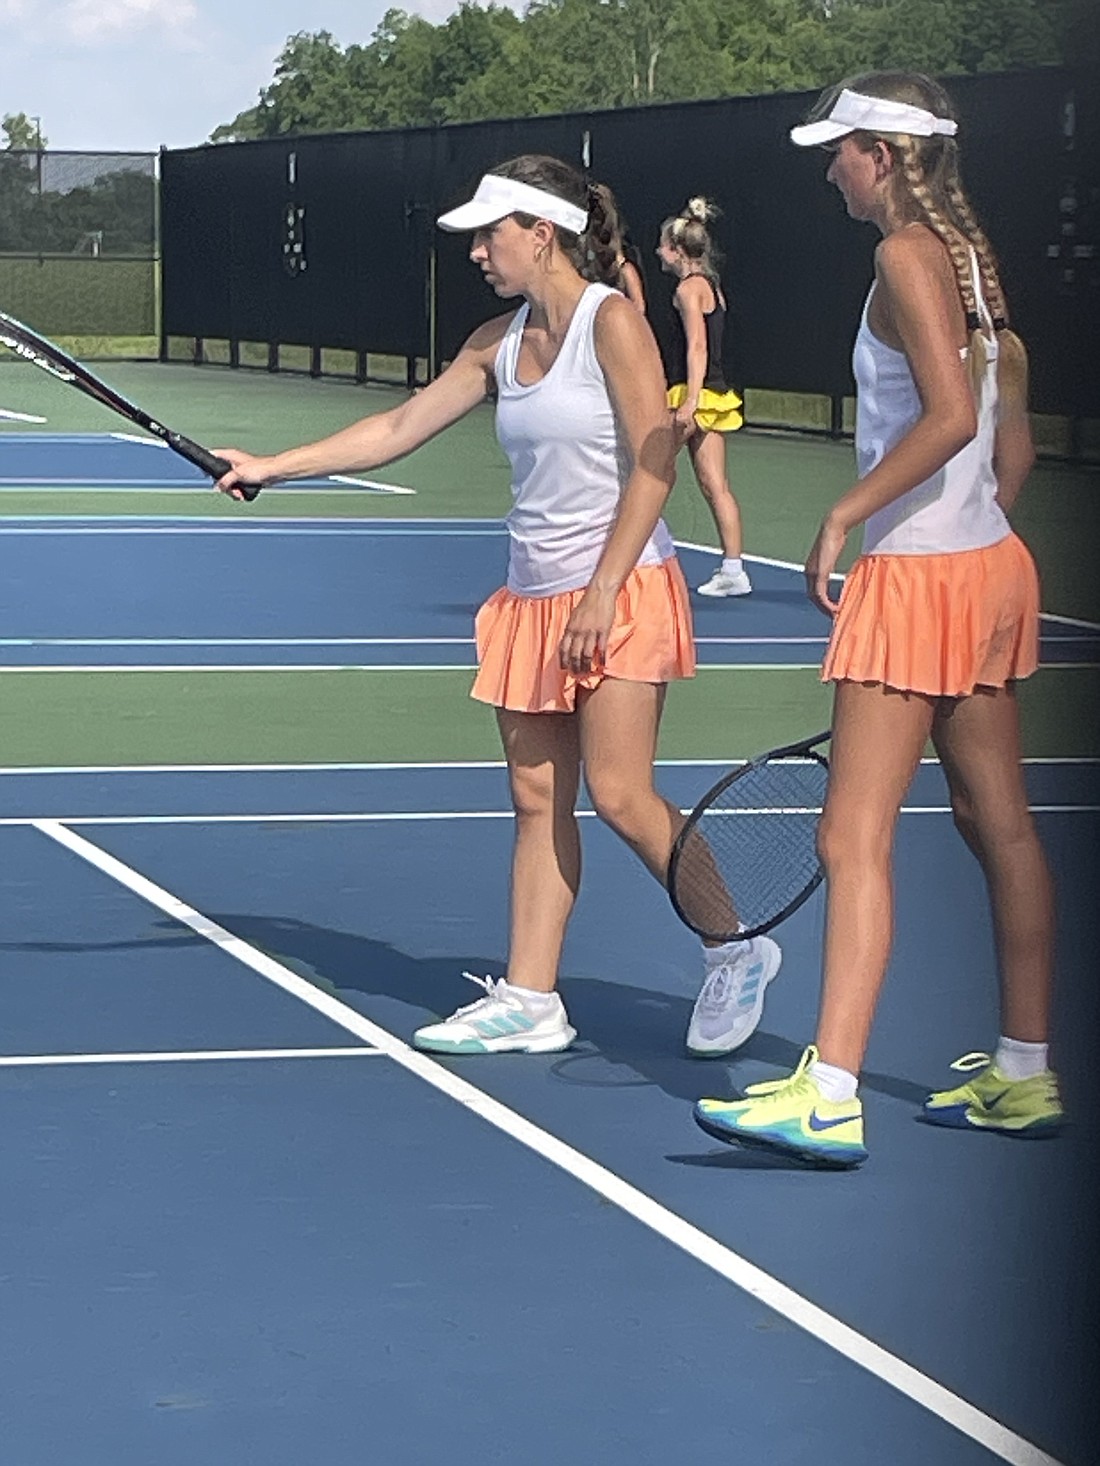 The Warsaw No. 2 doubles team of Lucy Ray (left) and Whitney Dawson (right) discuss strategy during their match against Penn in the IHSAA girls tennis regional Tuesday at NorthWood.